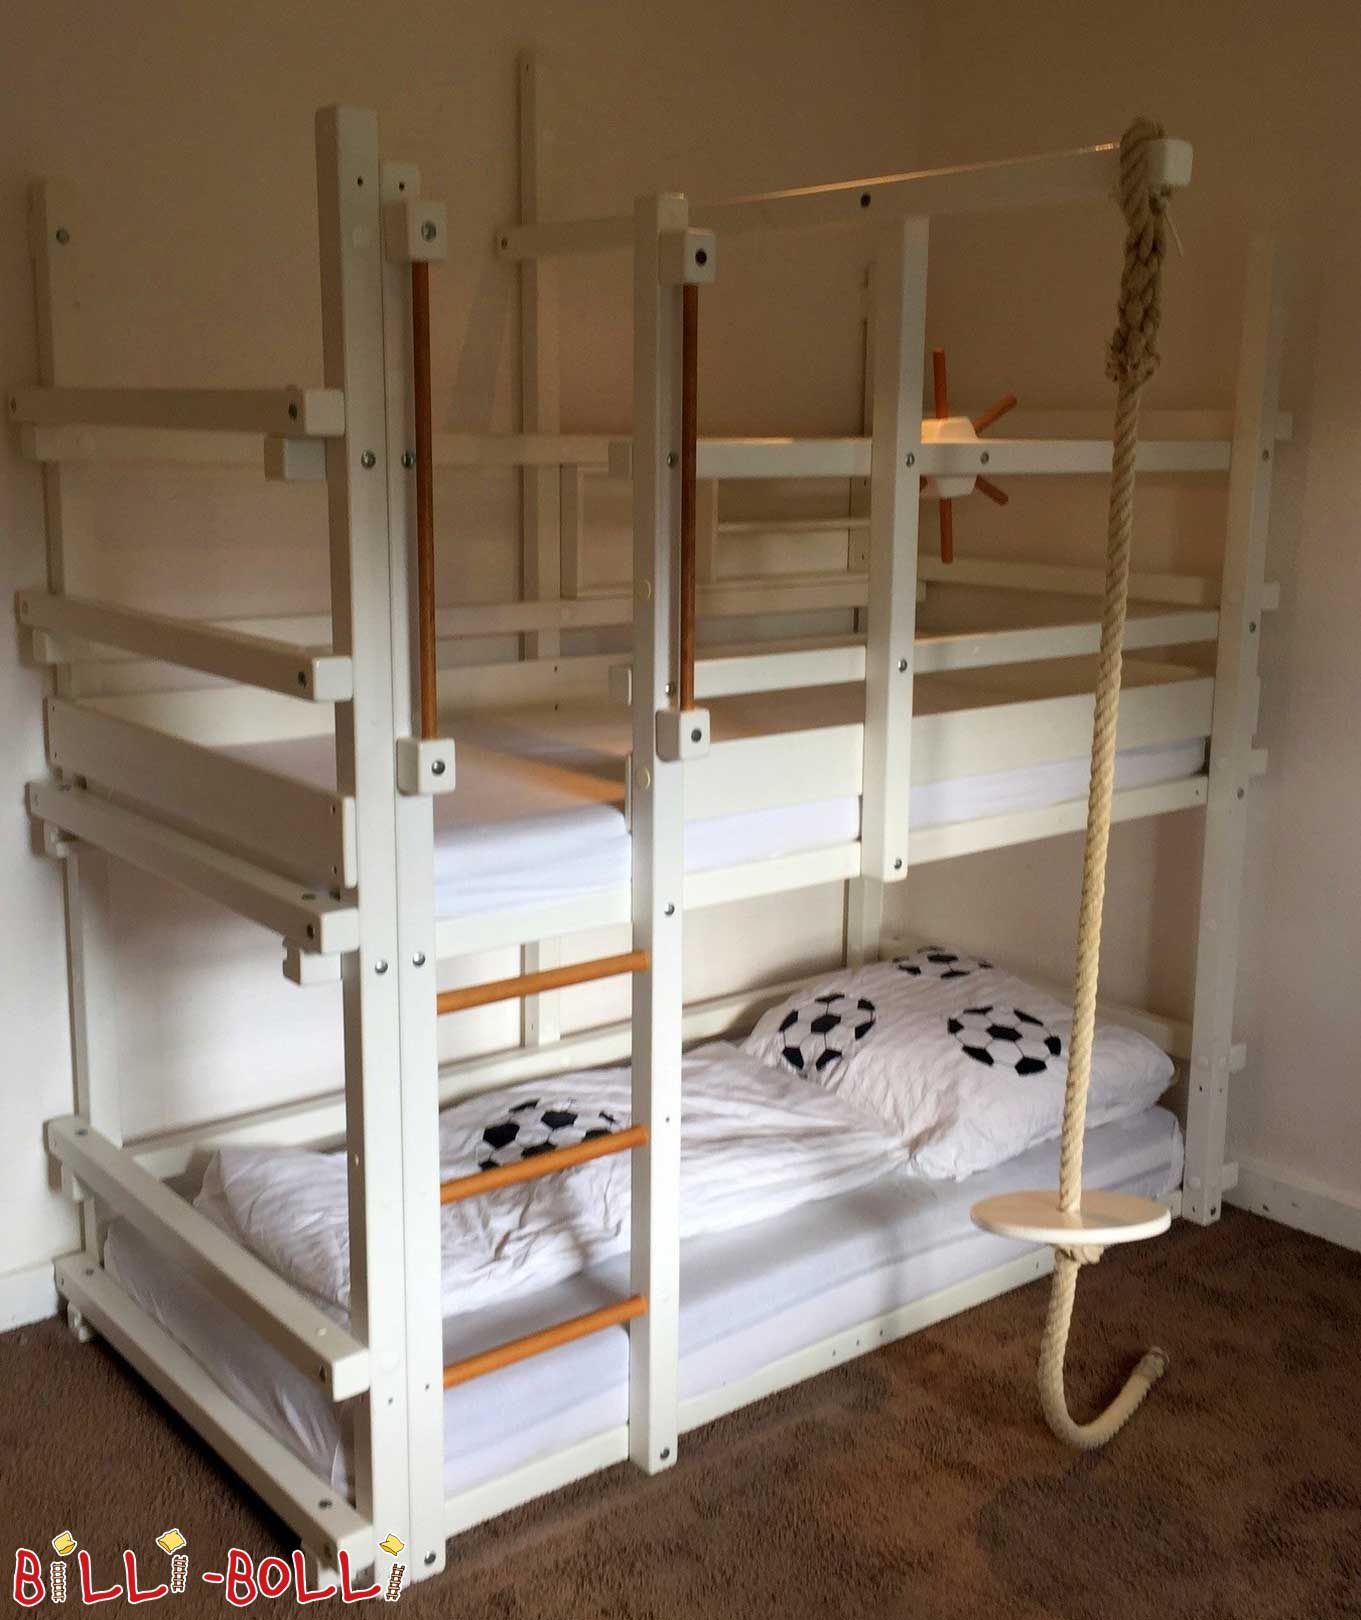 Cot white lacquered (Category: second hand bunk bed)